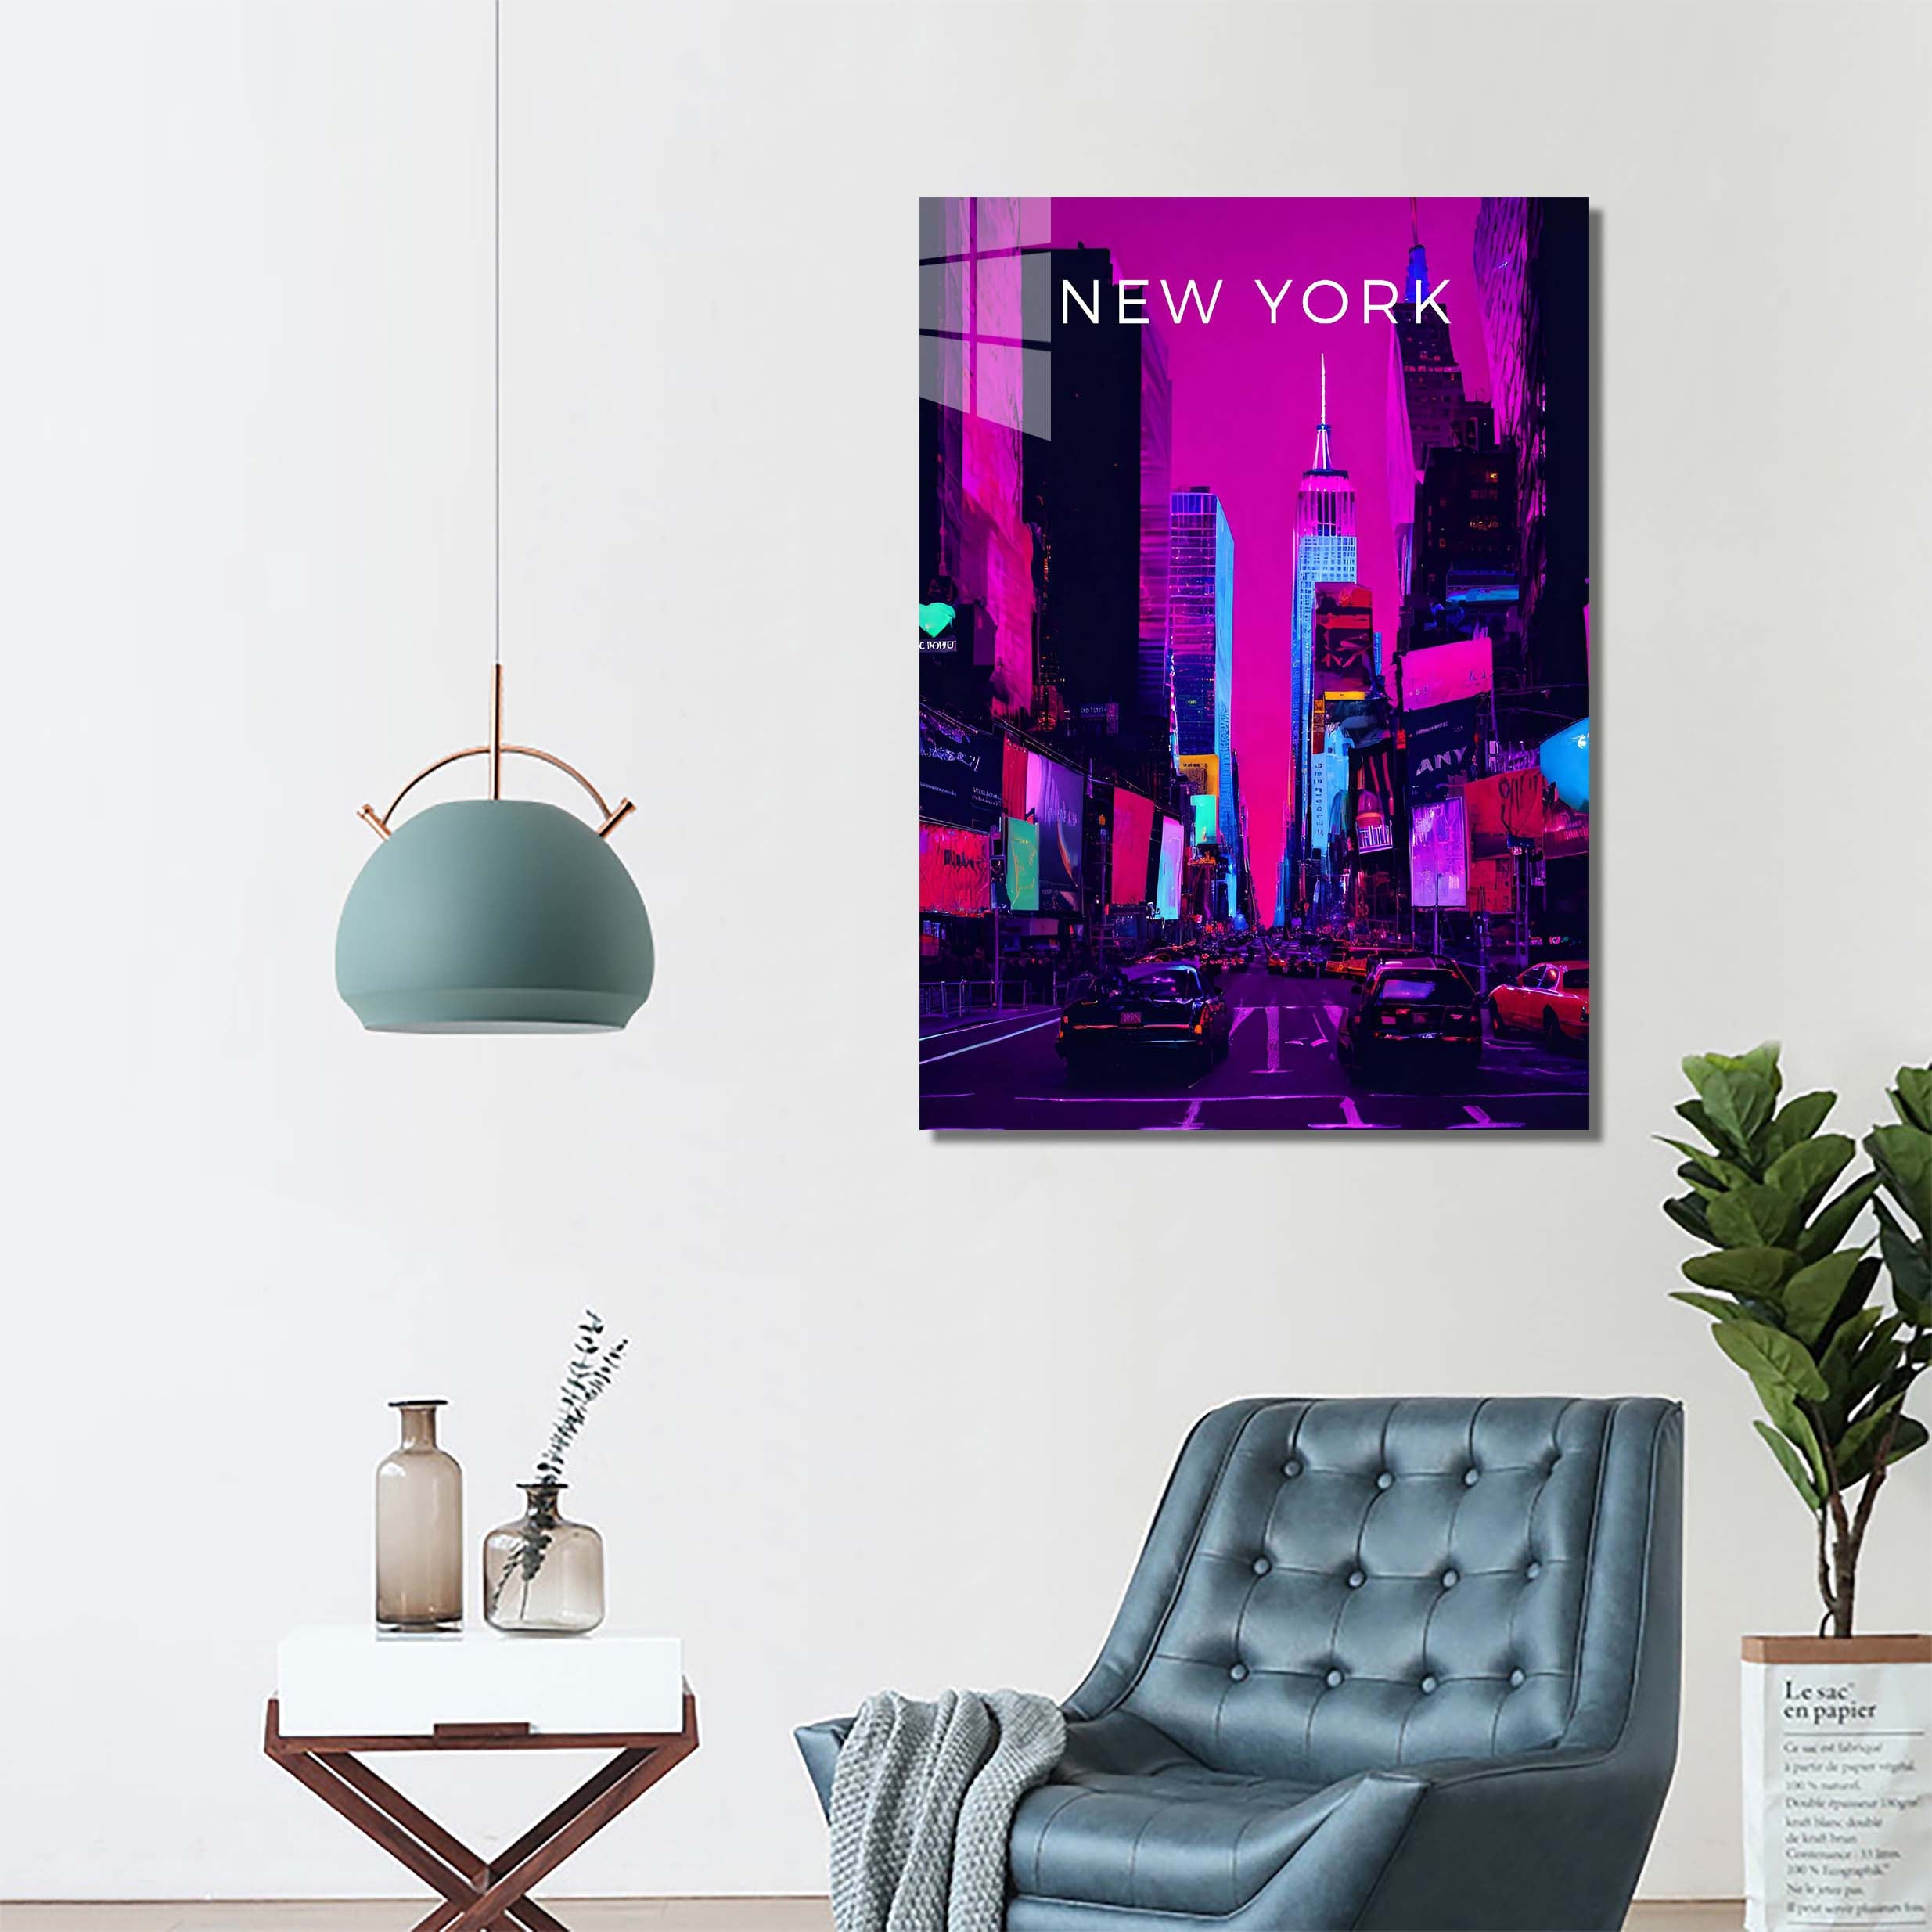 New York City-designed by @DynCreative